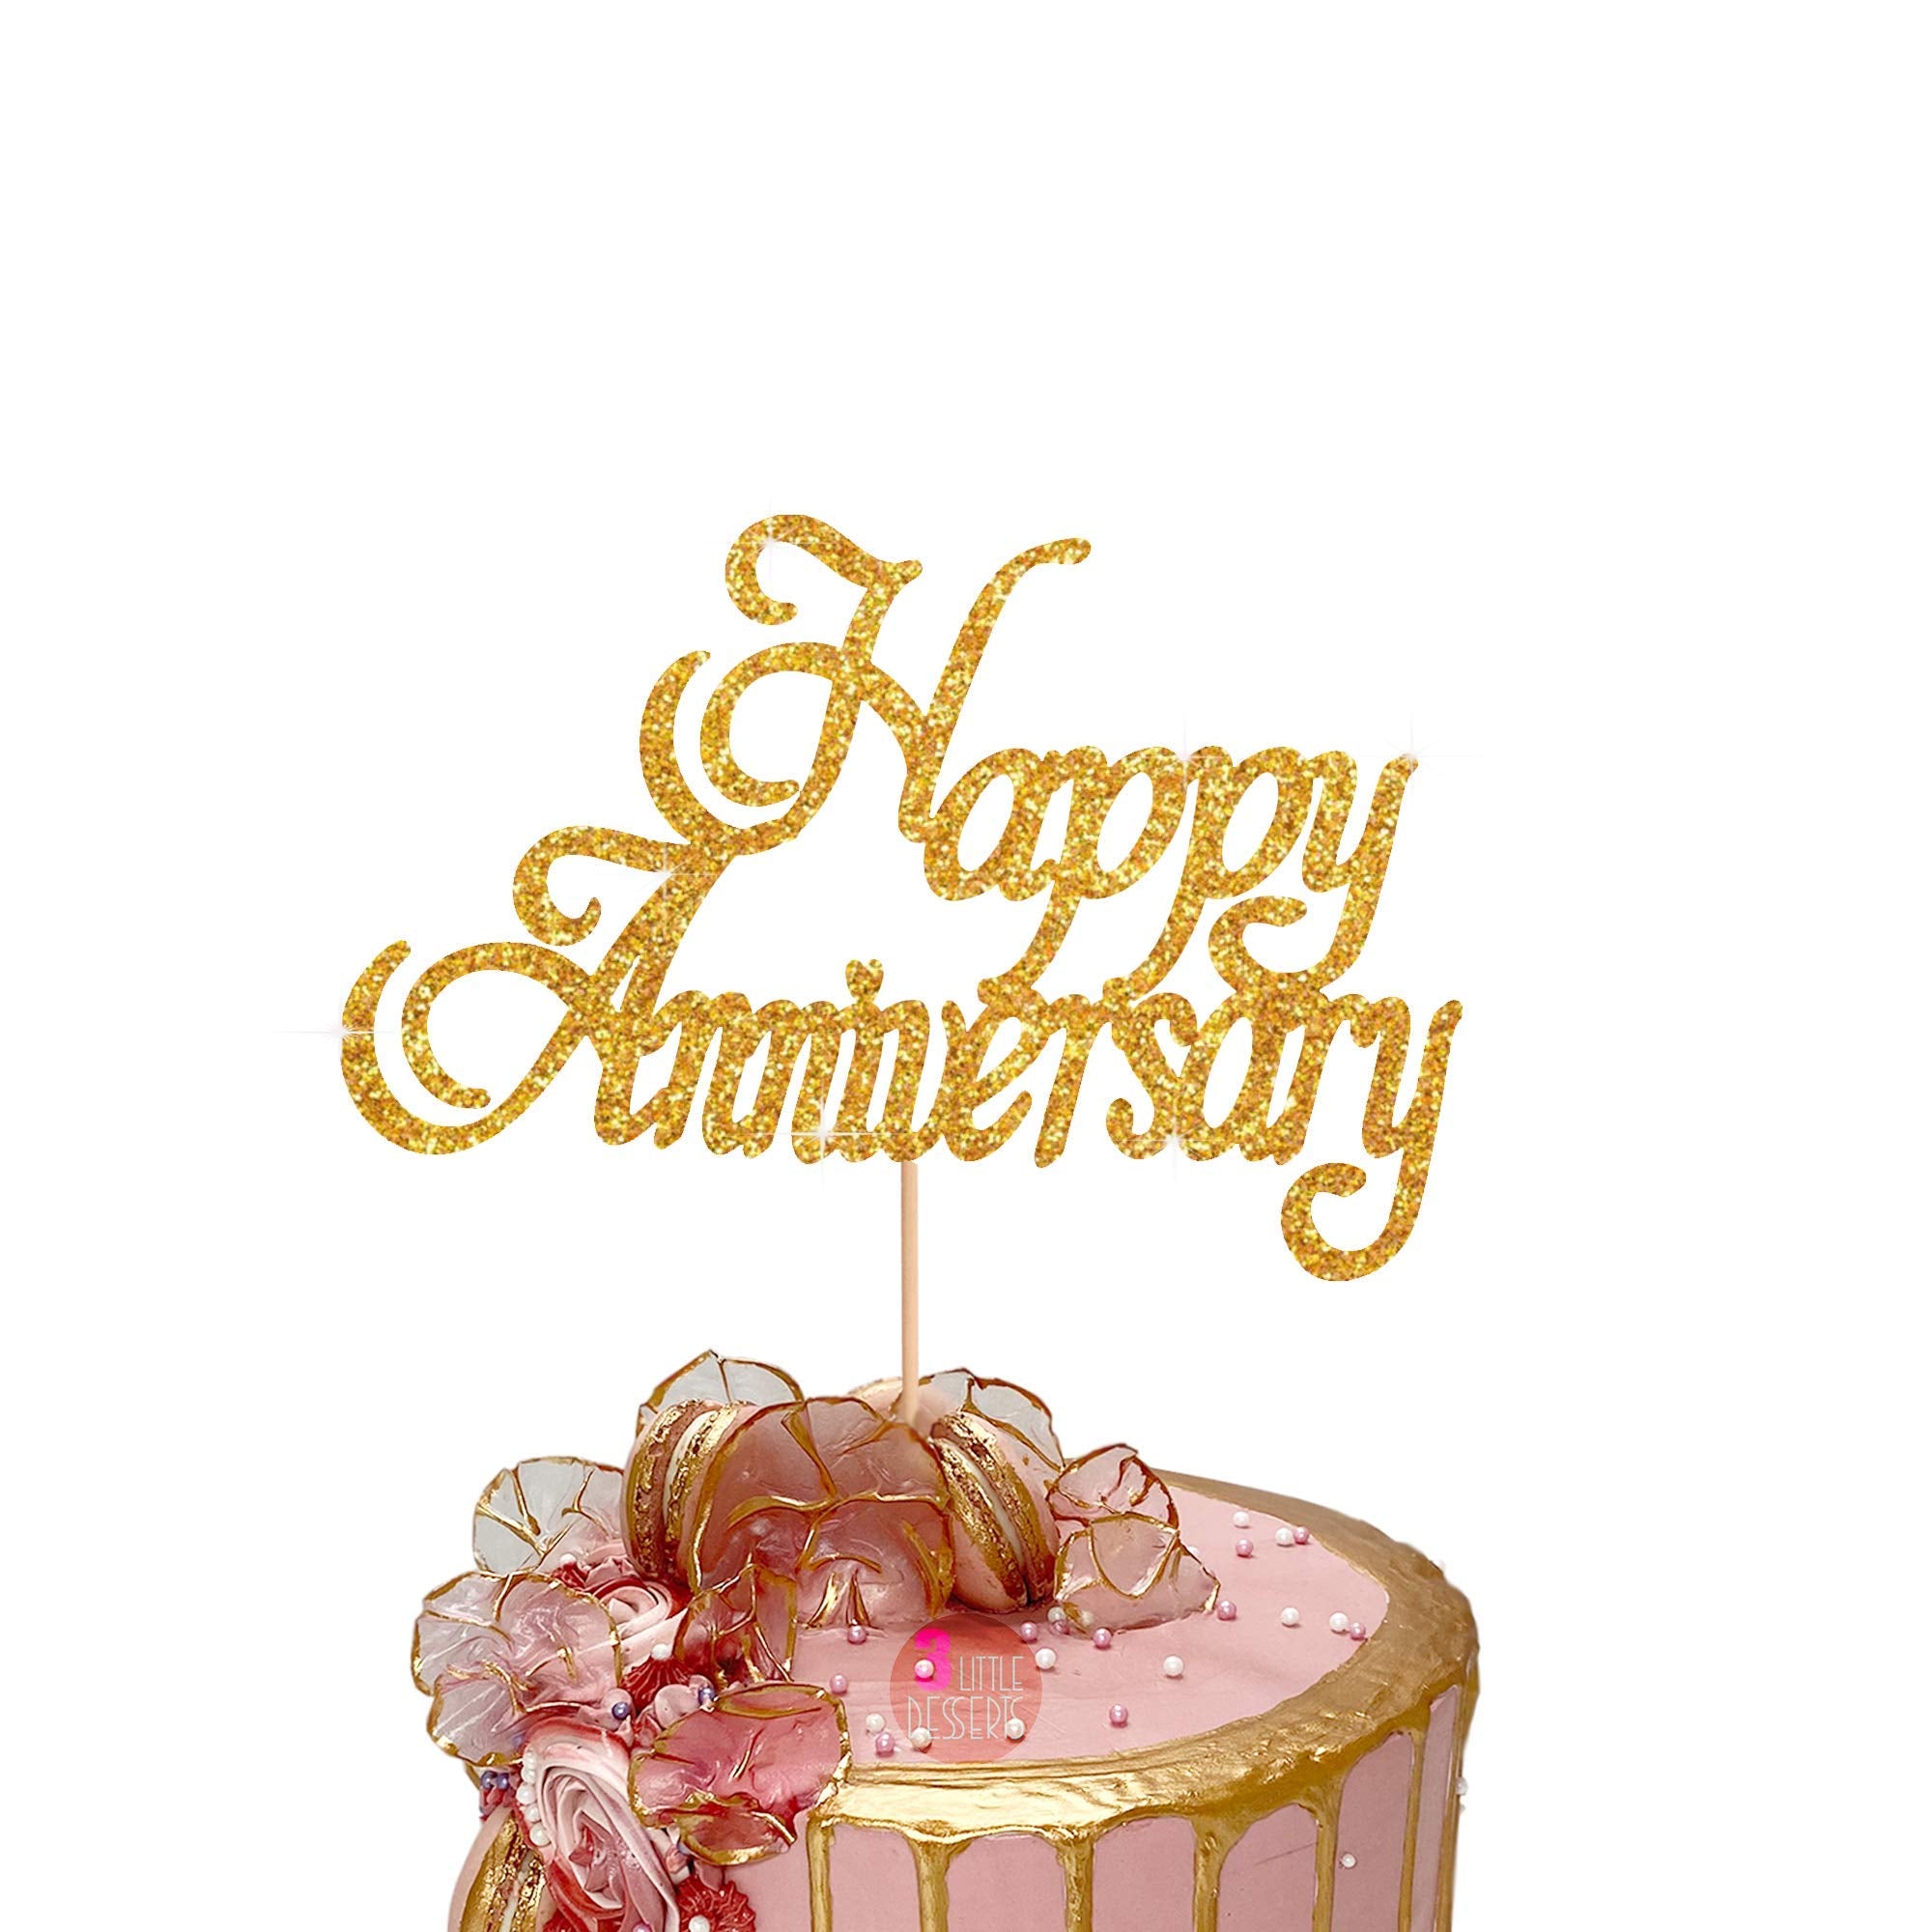 HAPPY ANNIVERSARY Cake Topper Glitter Card Wedding Marriage Elegant Toppers Decoration UK 7.5" x 5.5" (GOLD)